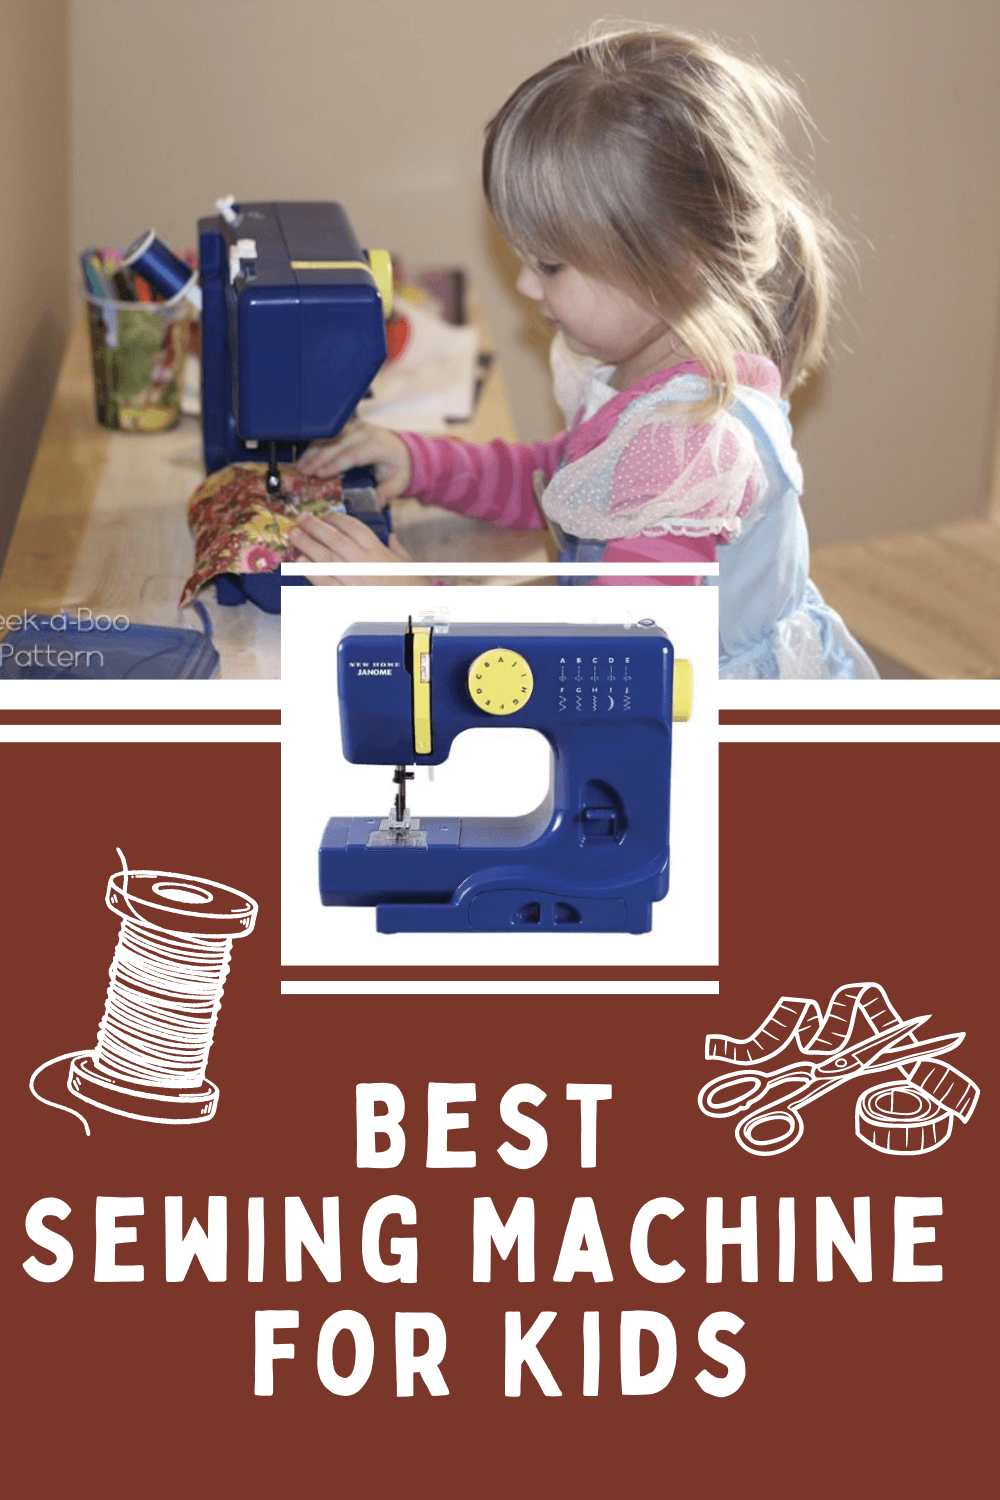 The best sewing machines for kids - Swoodson Says